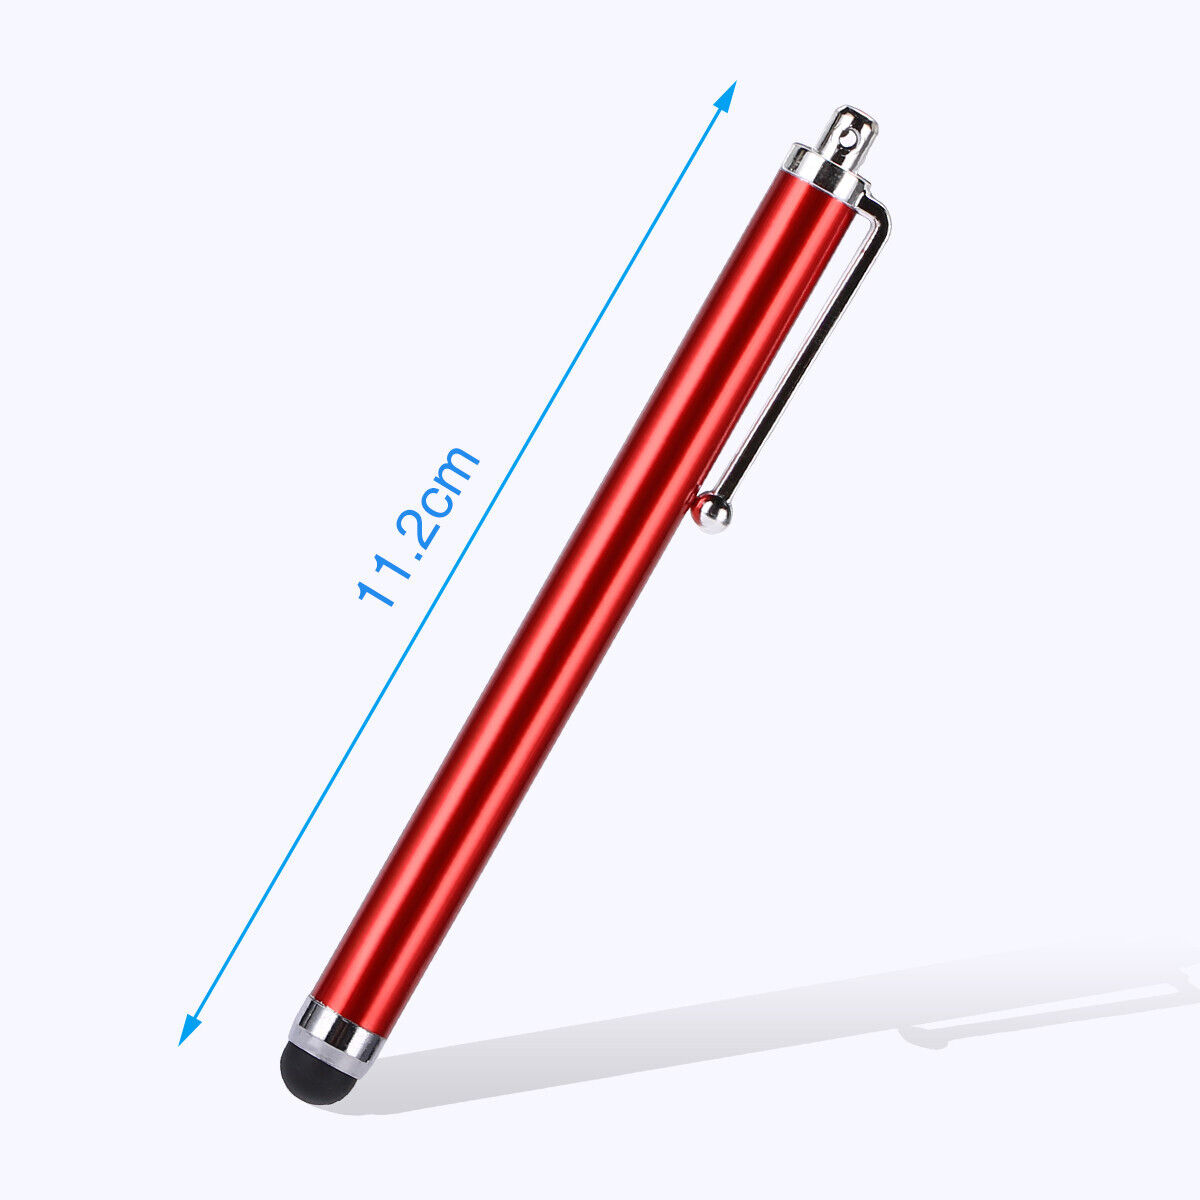 10 Capacitive Touch Screen Stylus Pen Universal For iPhone iPad Samsung Tablet Ombar Universal Touch Screen Stylus/Pen - фотография #7